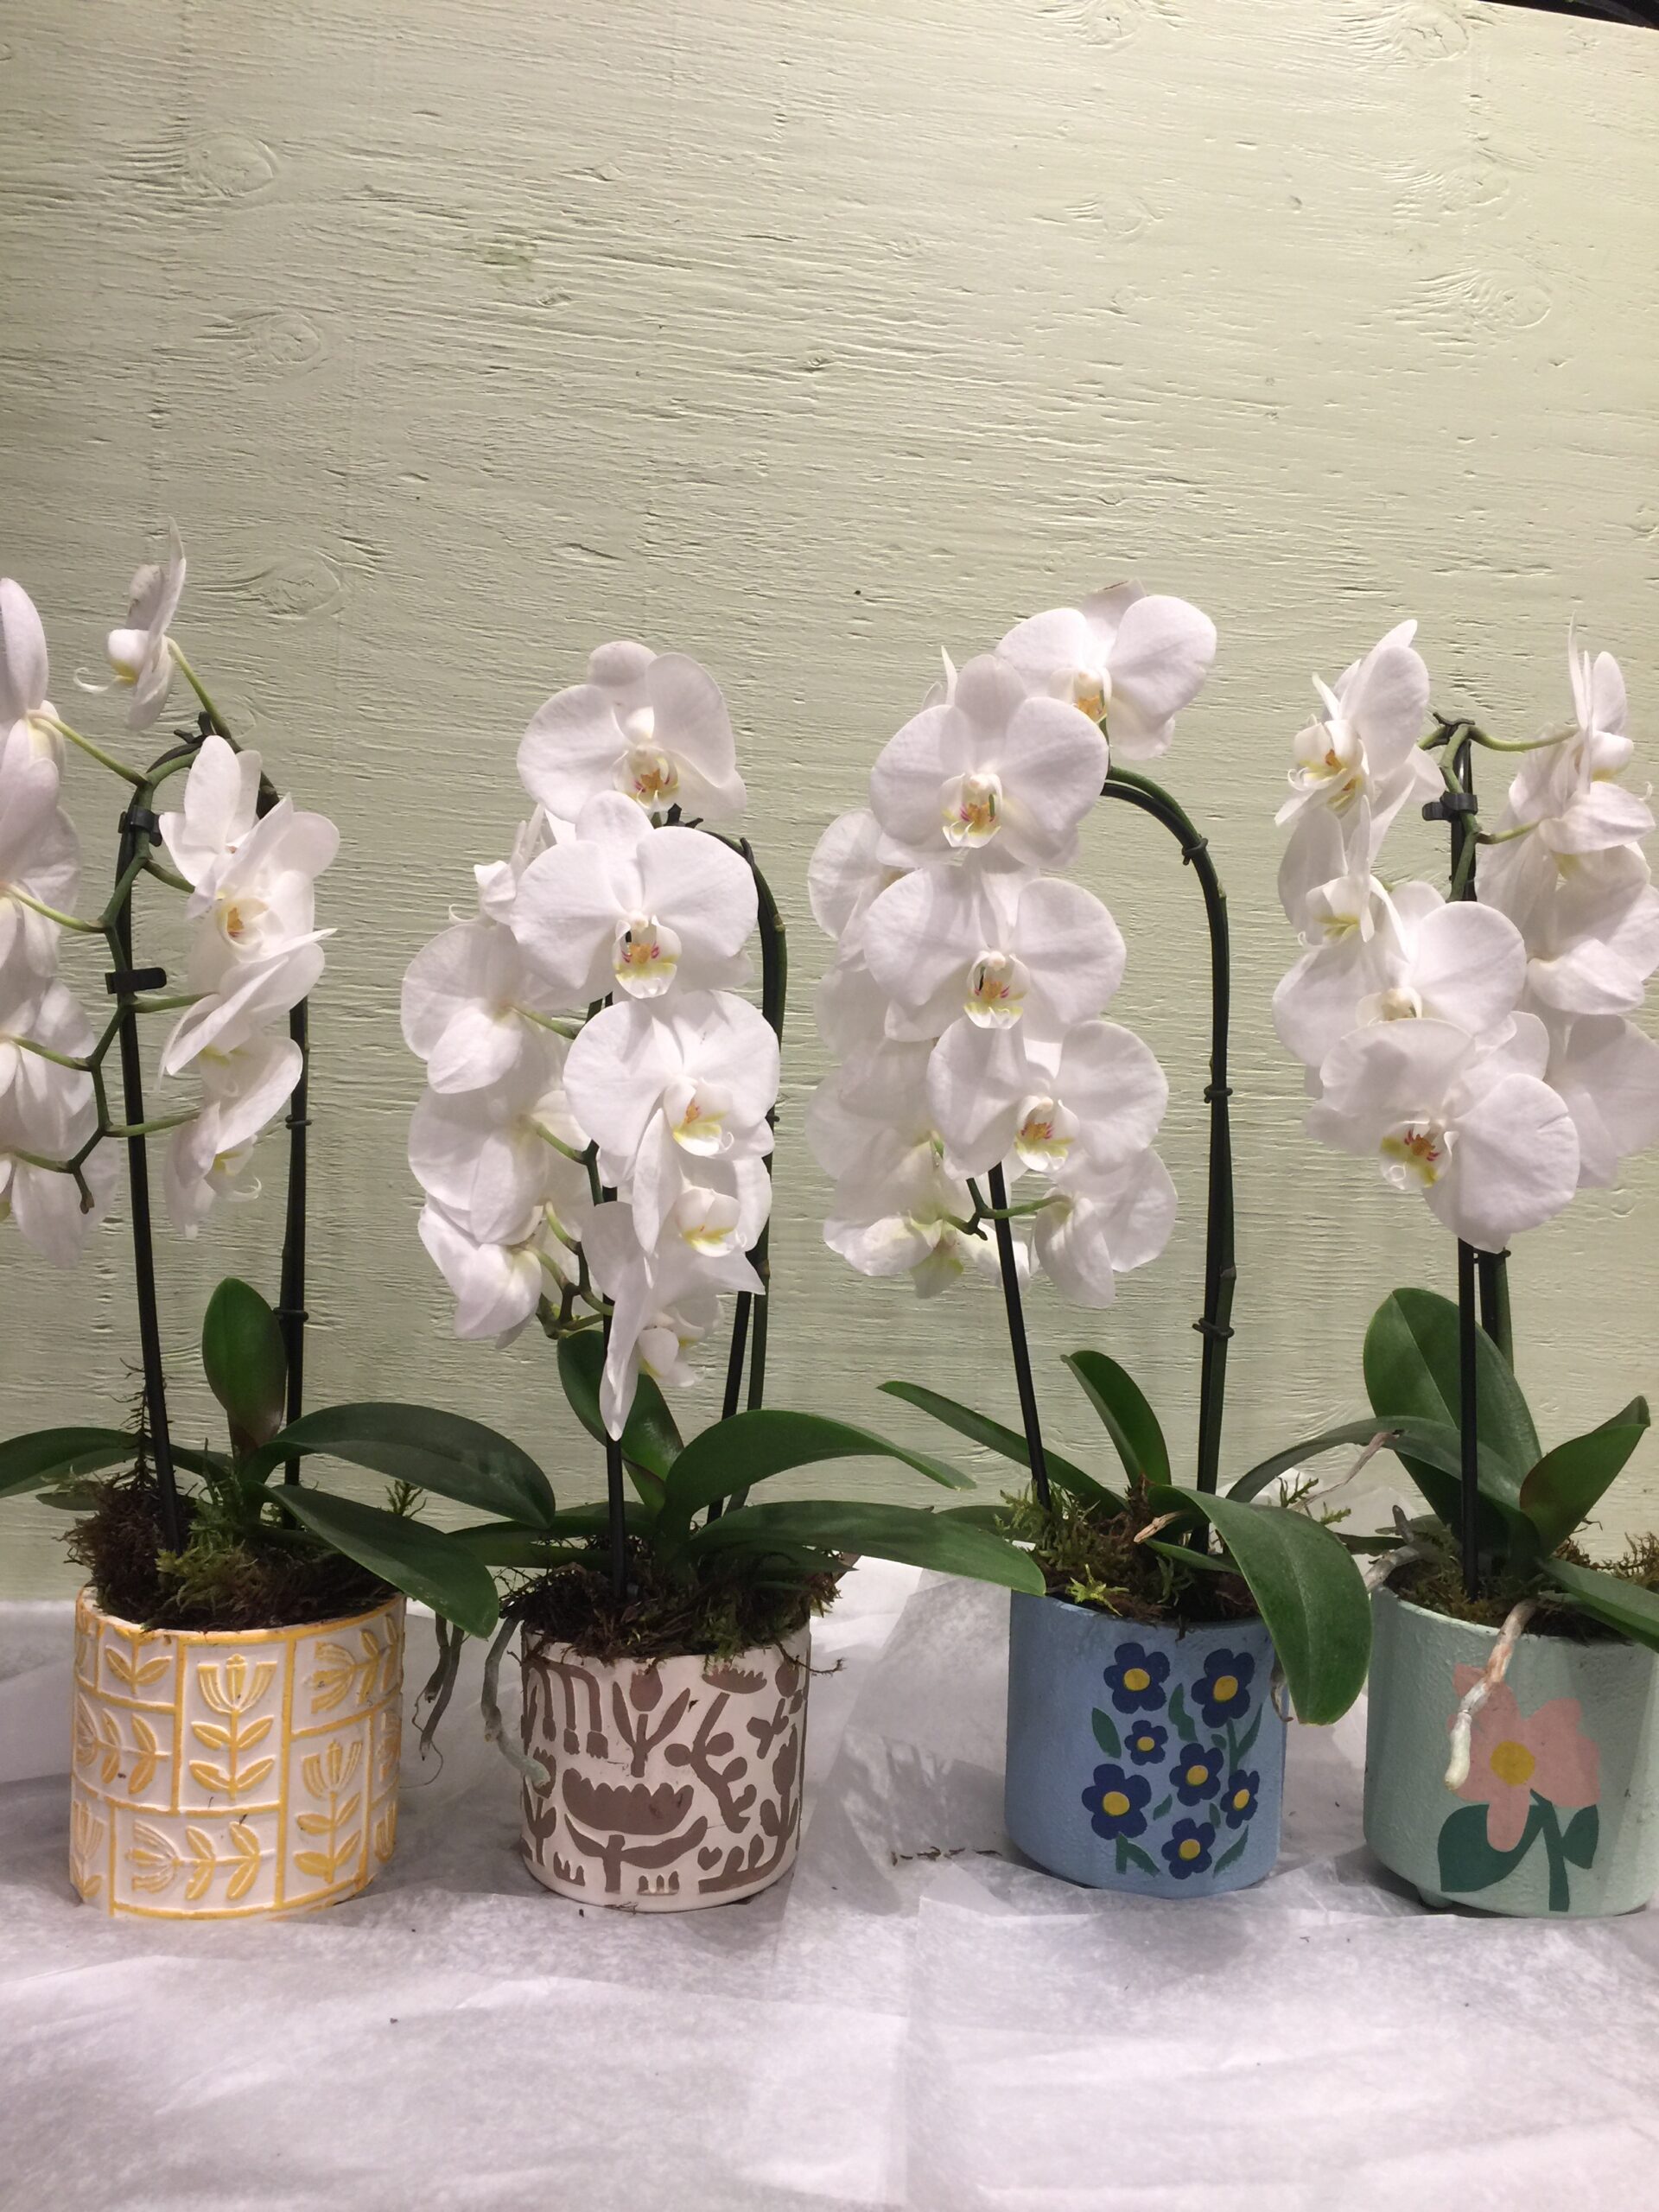 Phalaenopsis Orchid with a 3.5″ Unique Ceramic Spring Pot